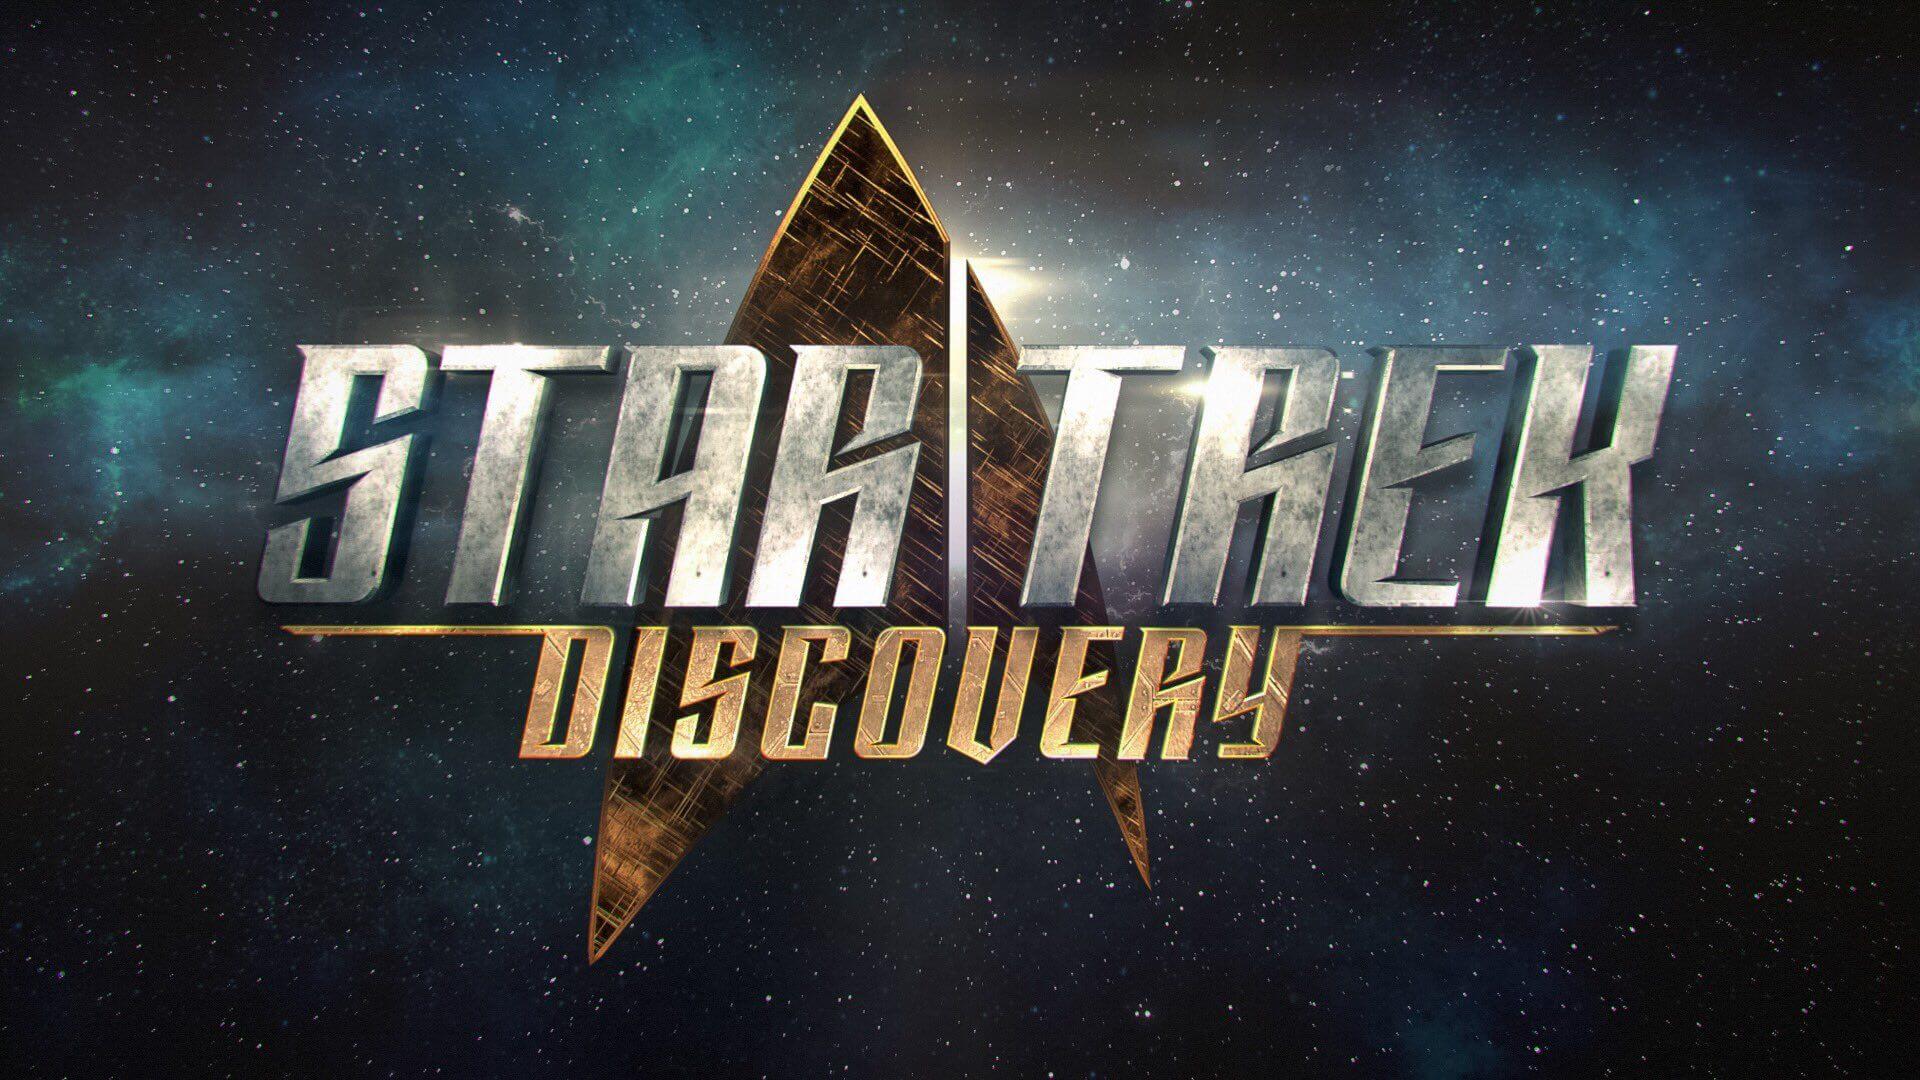 Star Trek: Discovery Making Its Way to UK's Channel 4